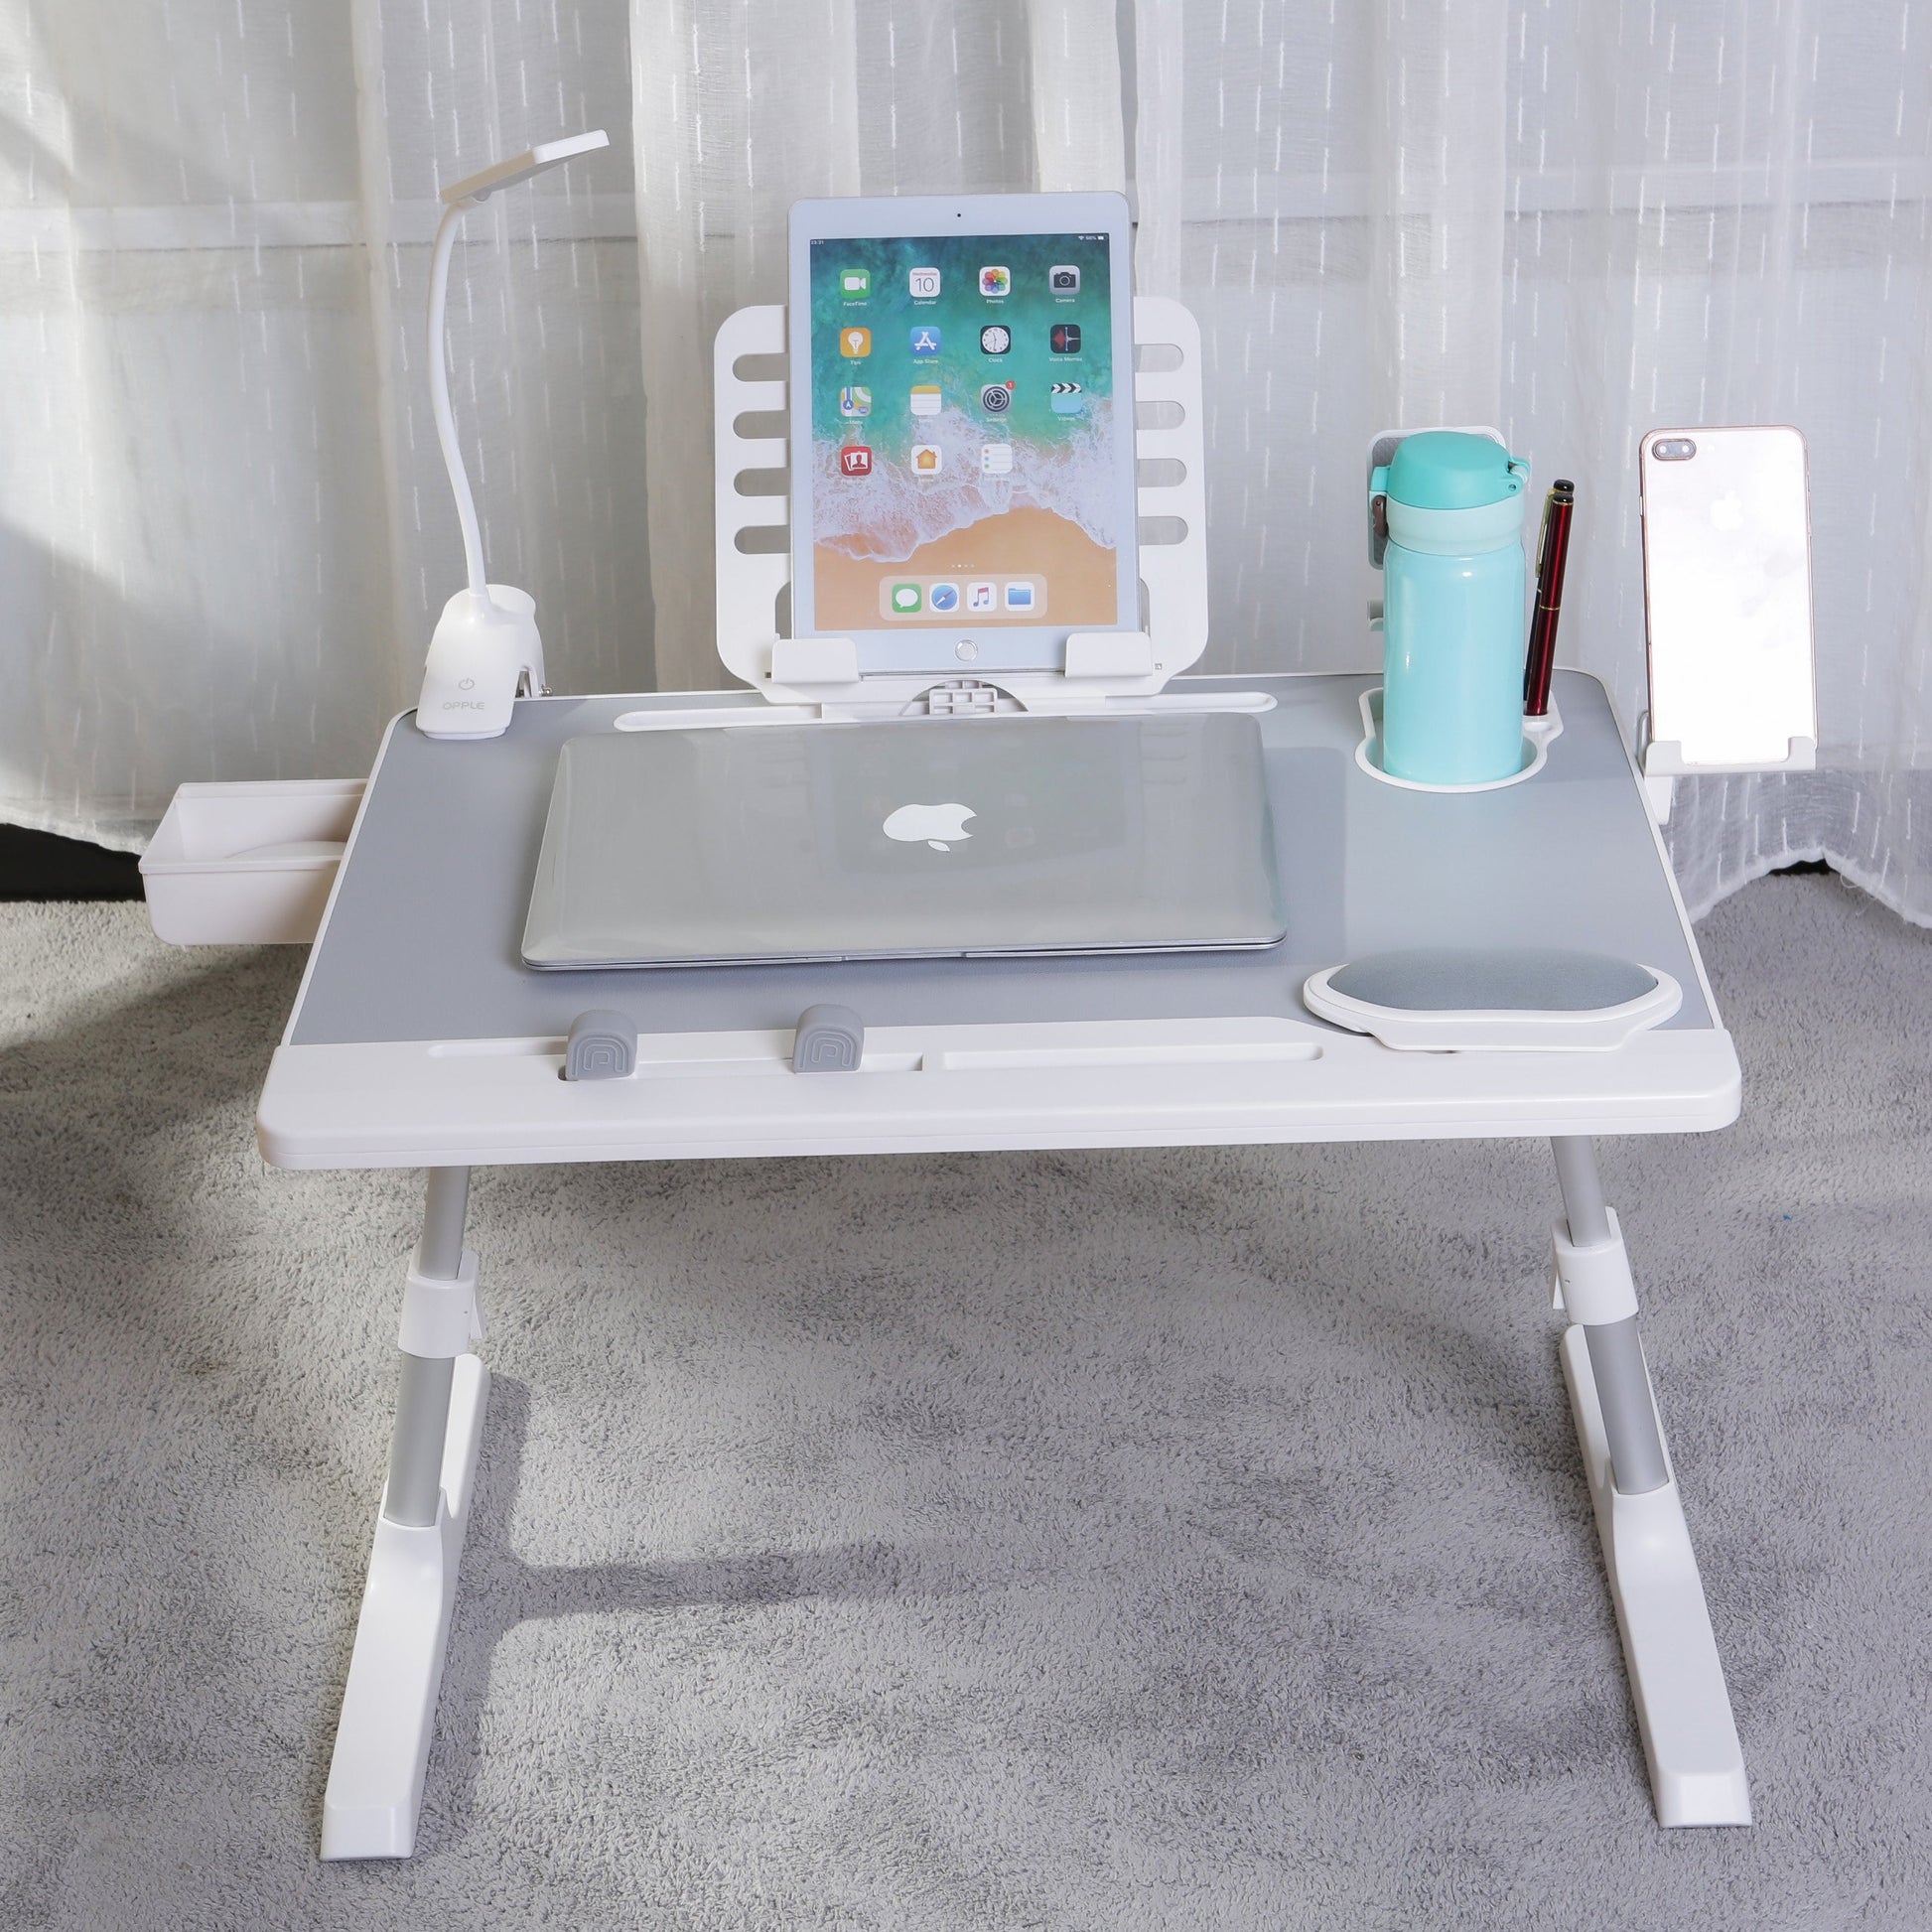 Portable Laptop Table Stand with Storage Drawer, Foldable Laptop Tray for Sofa Couch Floor, Adjustable Folding Laptop Desk baby magazin 